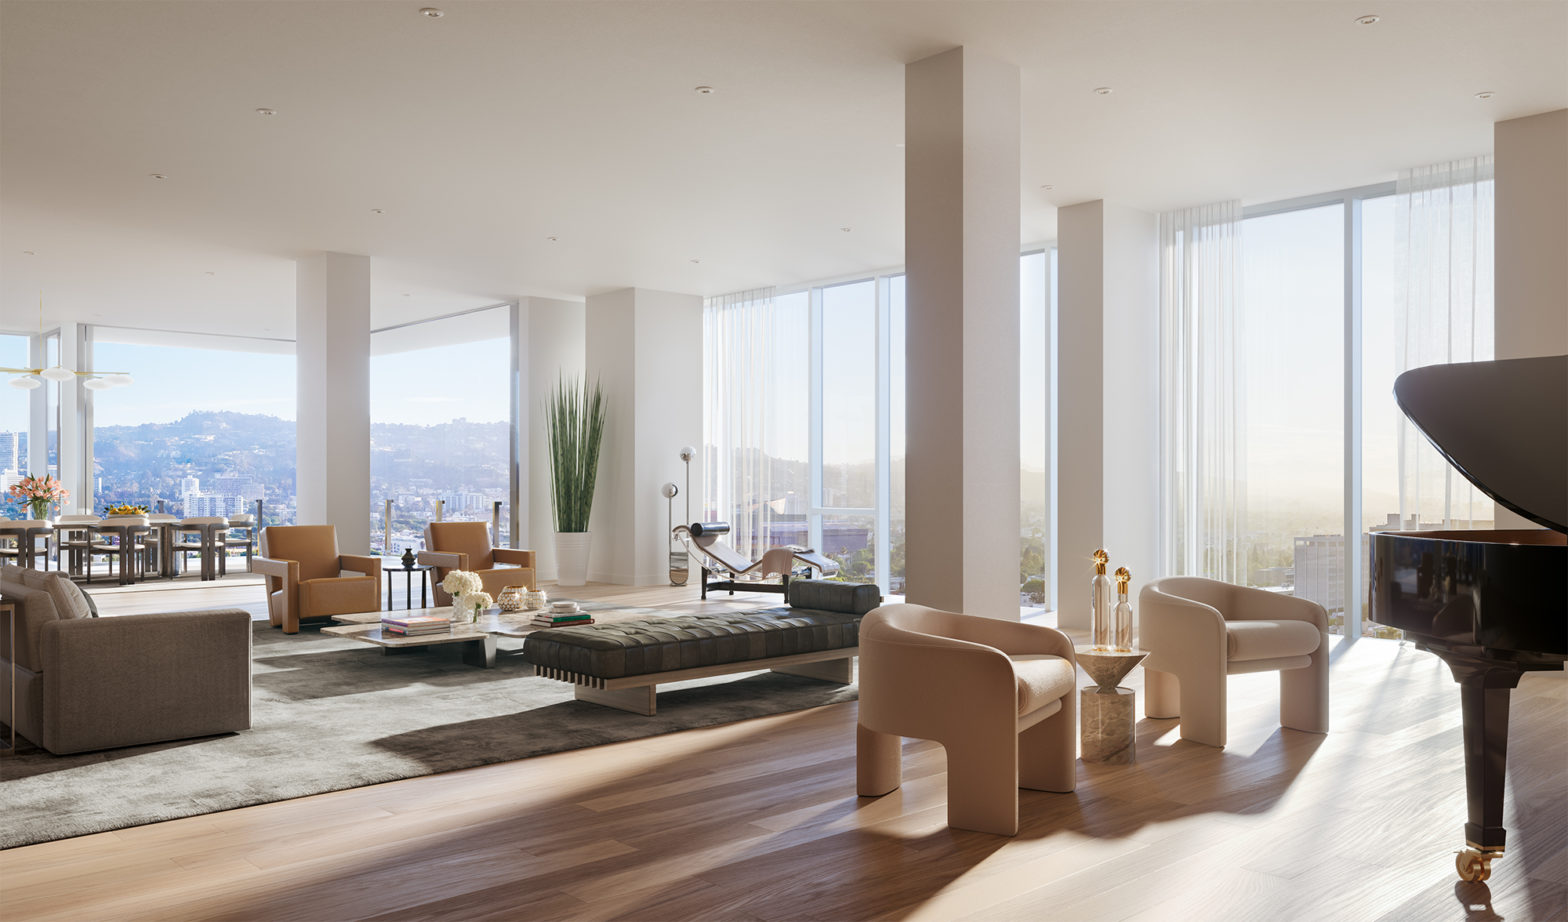 TN’s Luxury Travel: First Look At The Four Seasons Private Residence In Los Angeles